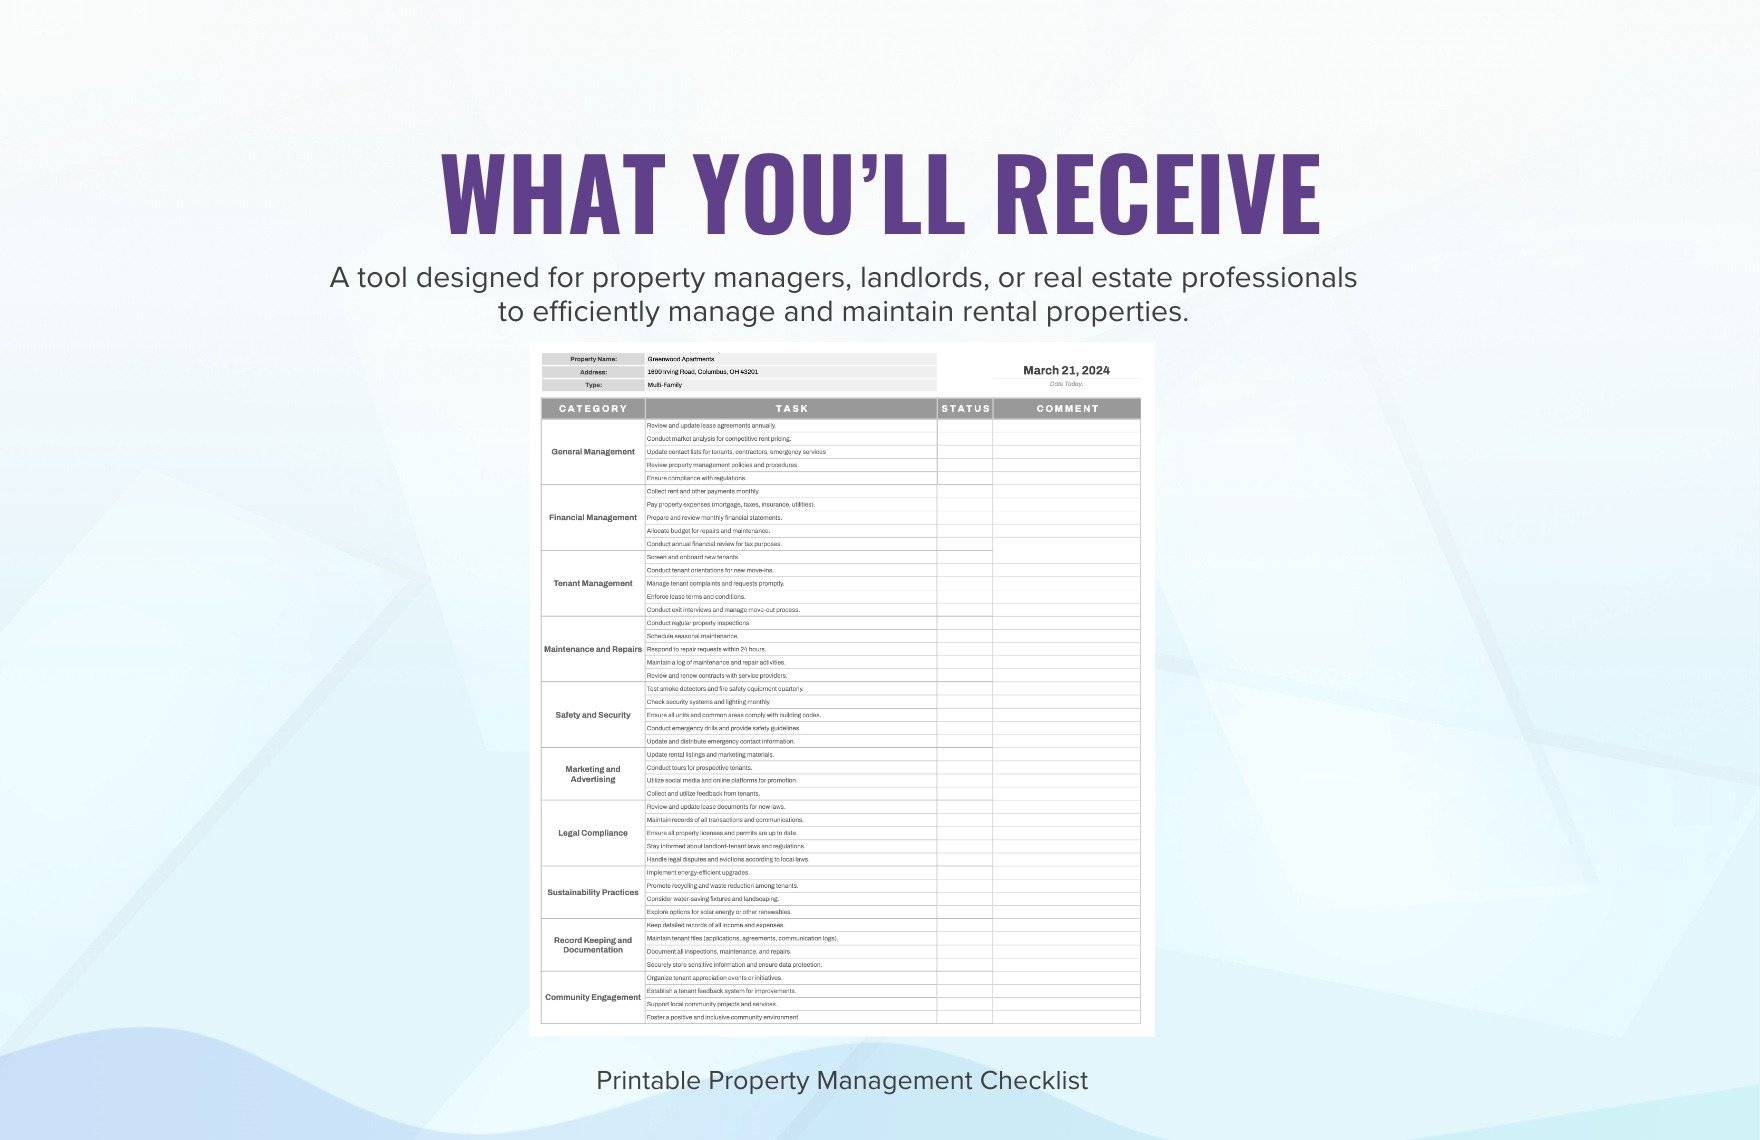 Printable Property Management Checklist Template